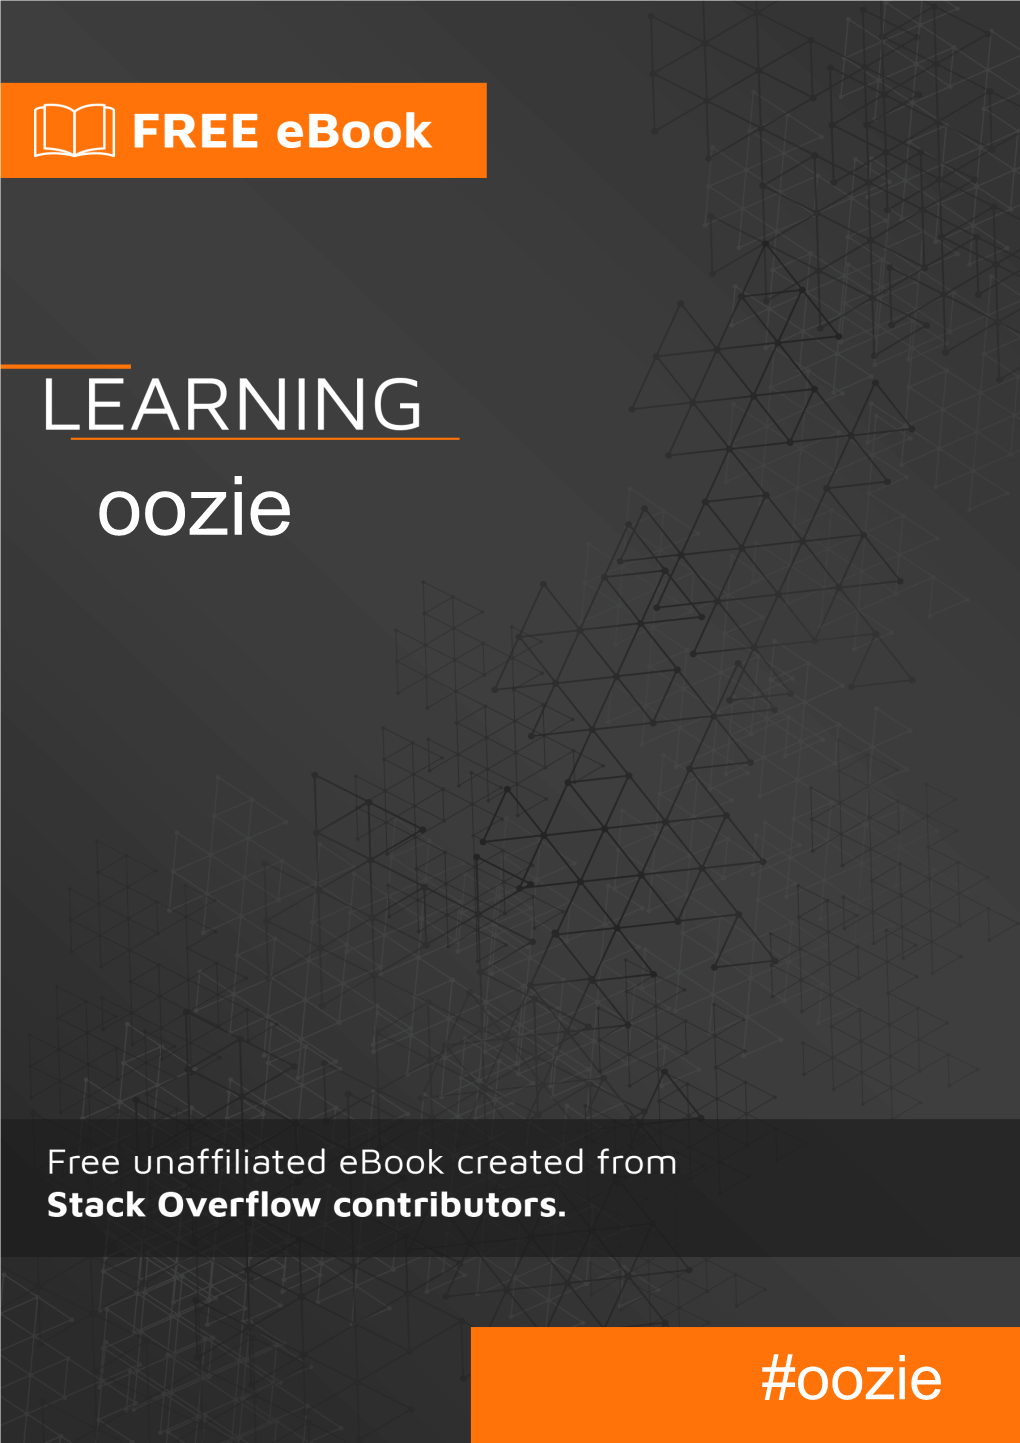 Oozie Table of Contents